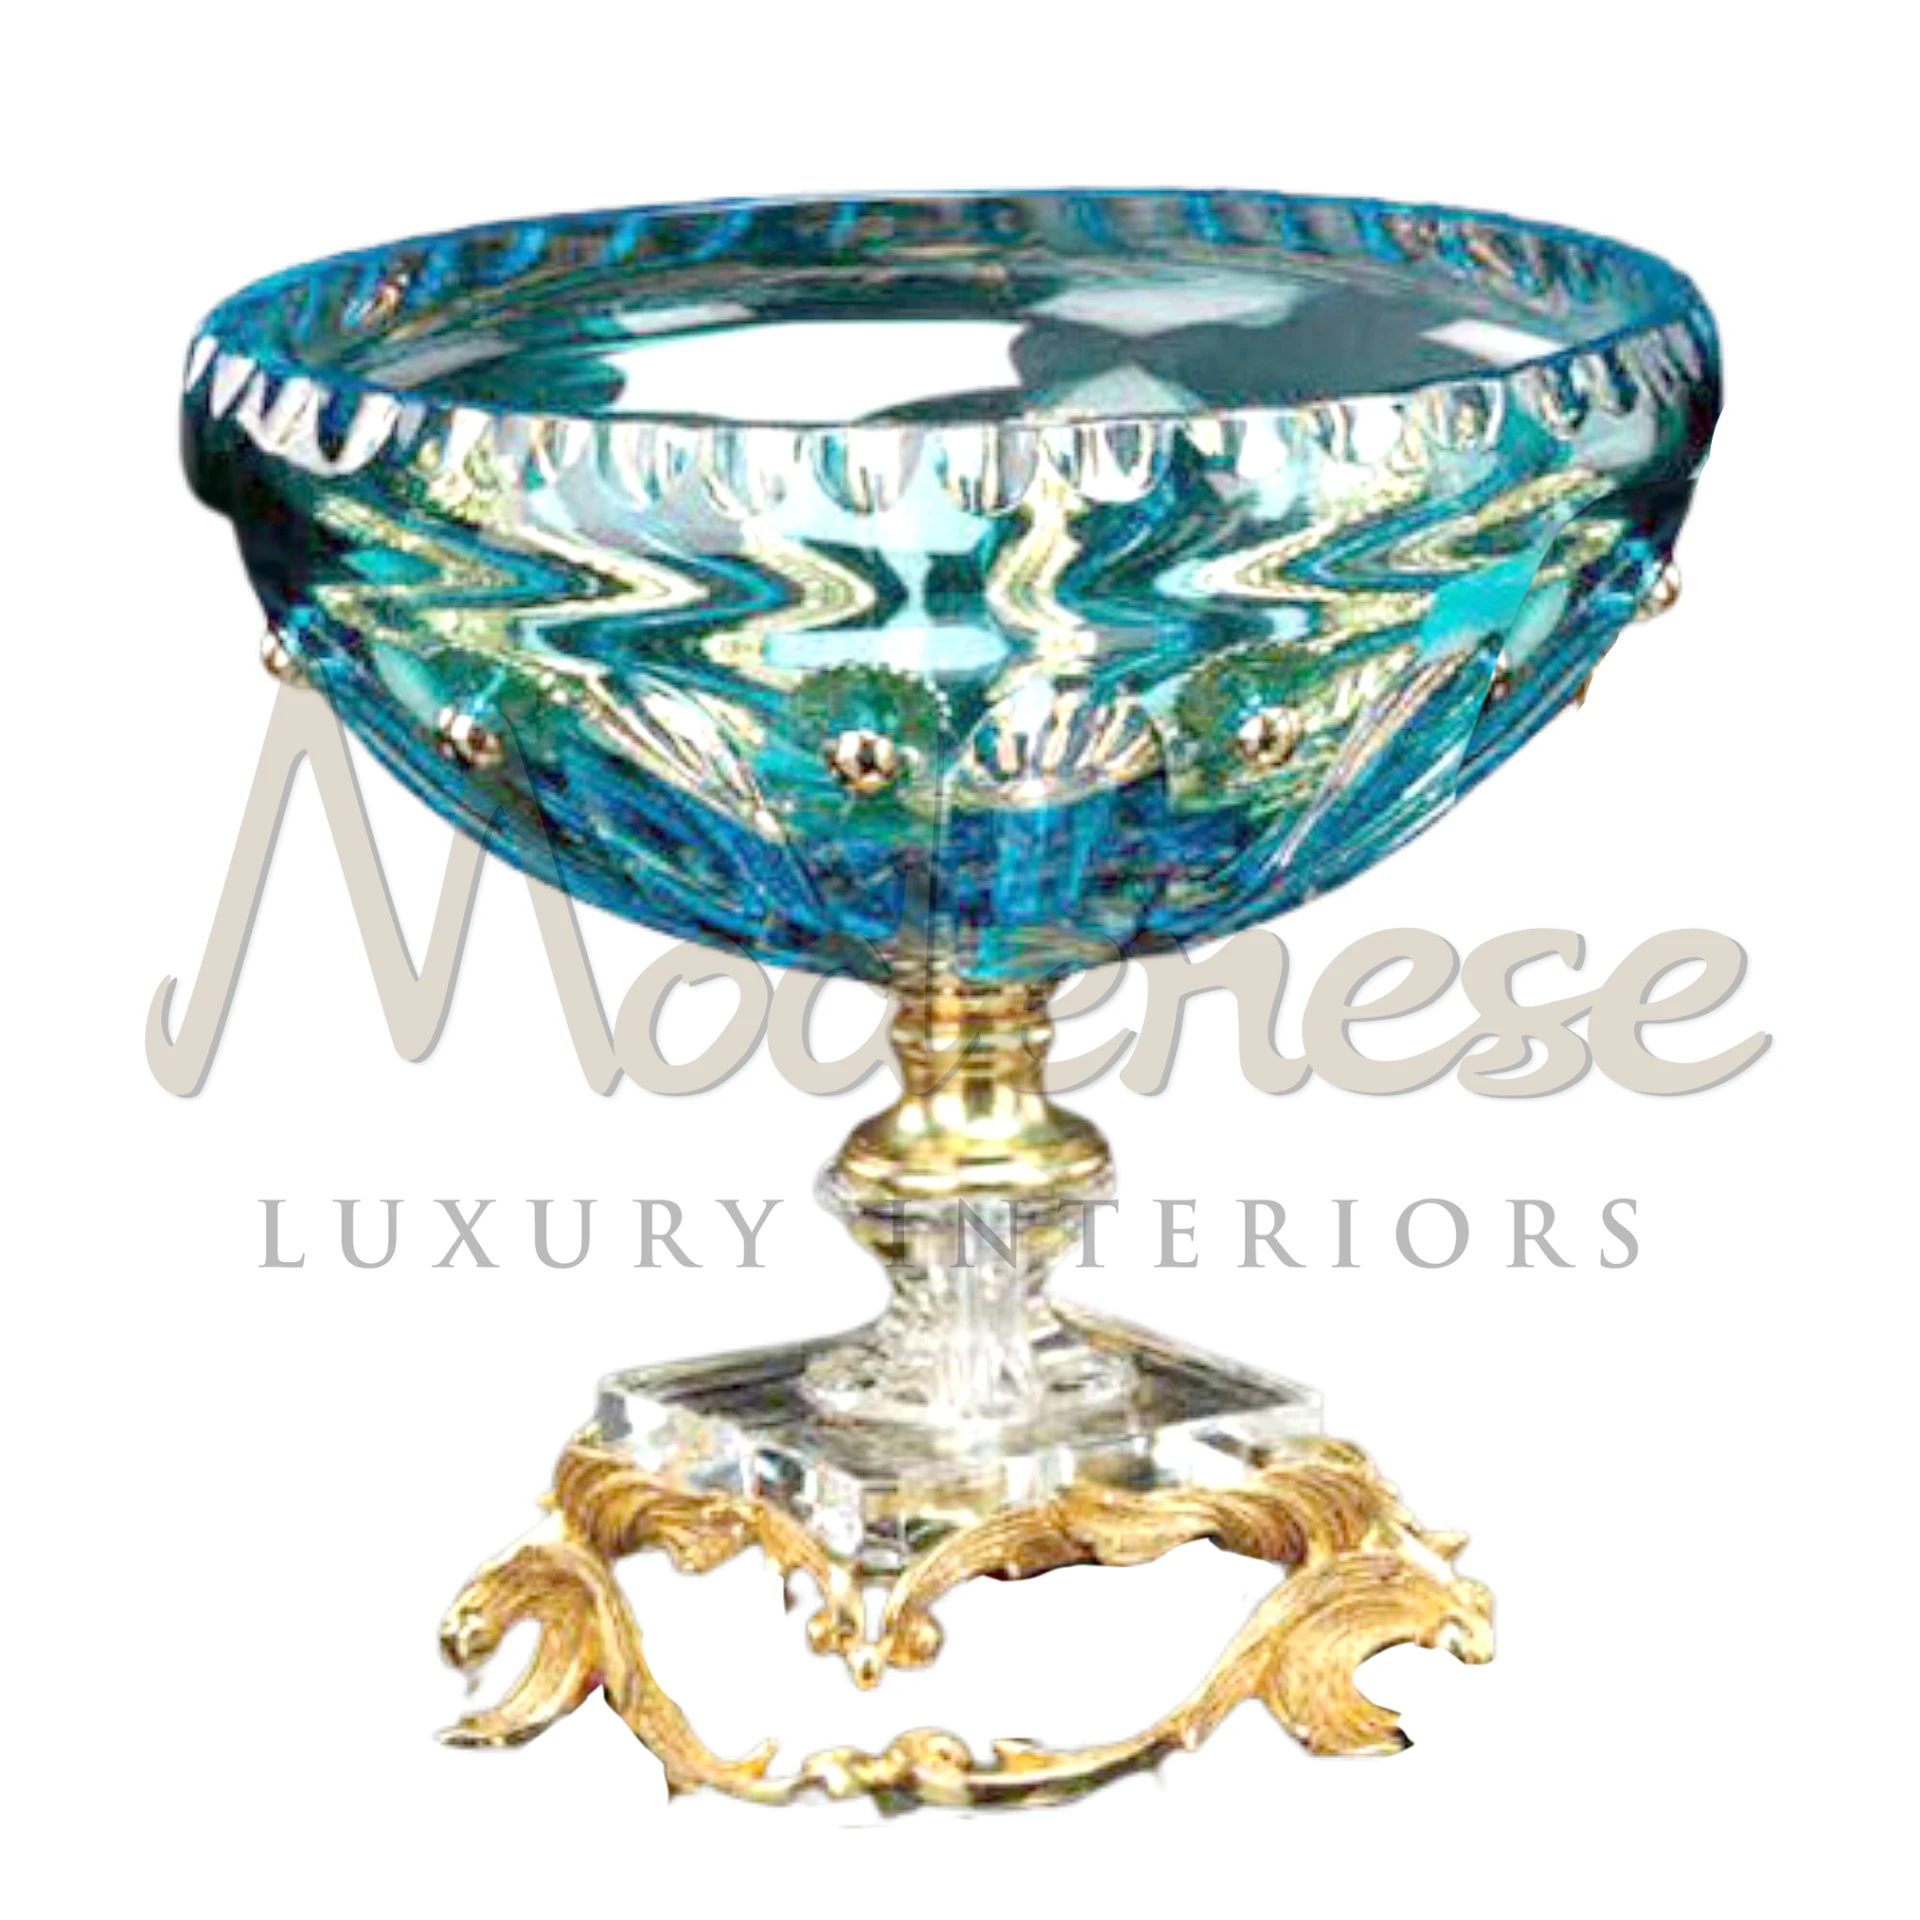 Luxury Turquoise Bowl, made from exquisite materials with intricate designs, showcases artisan craftsmanship, perfect for luxury and classic interiors.






